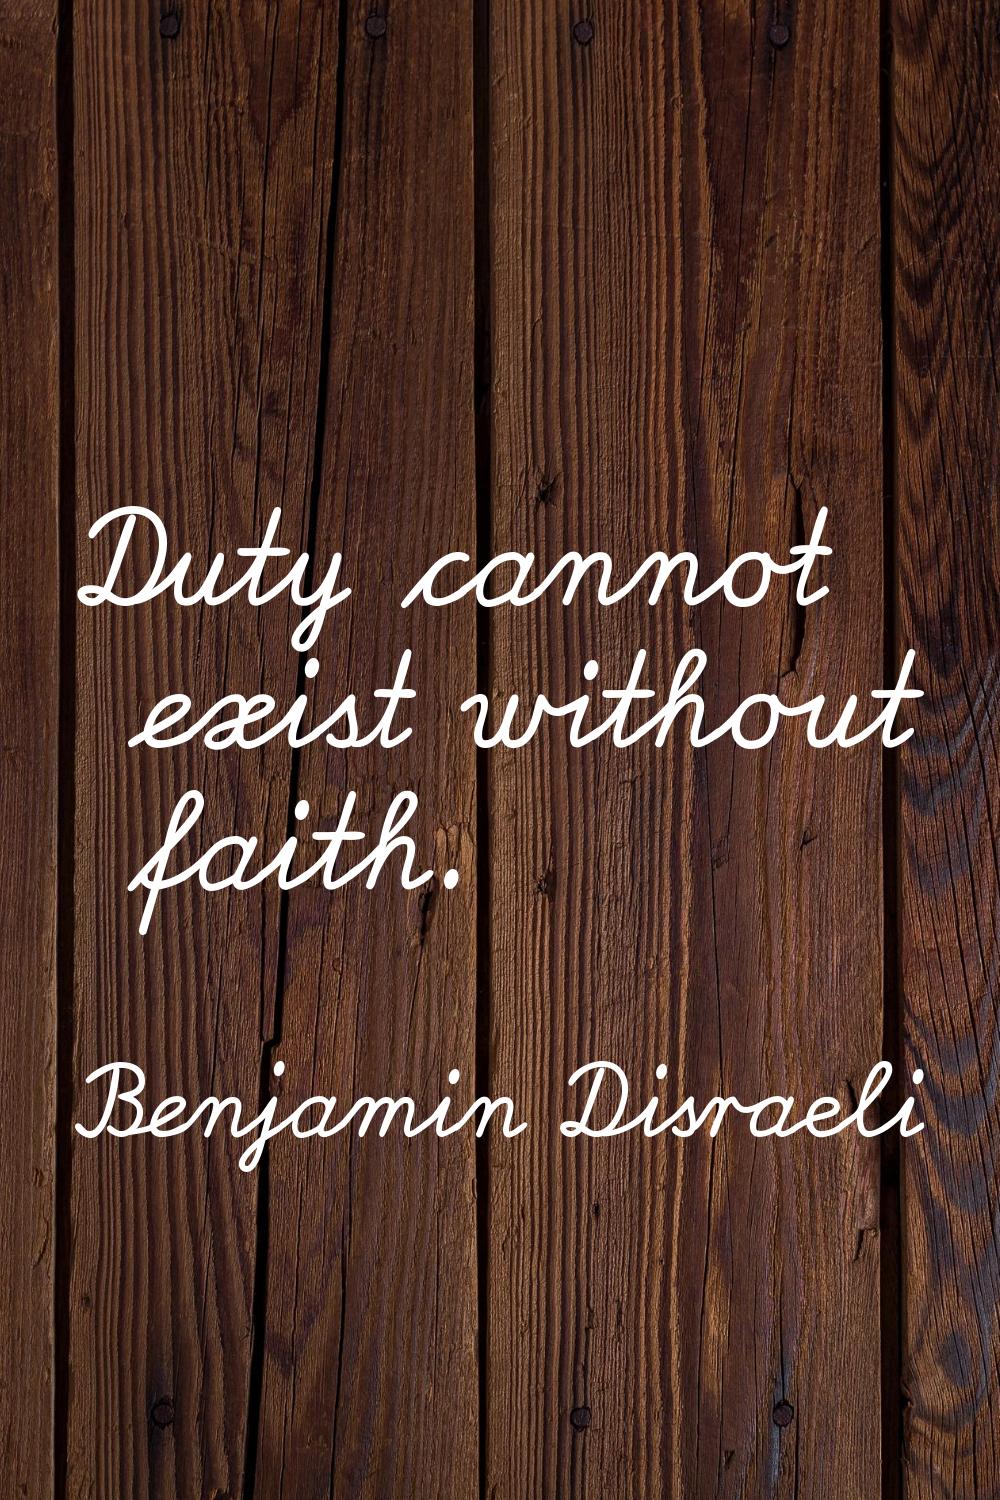 Duty cannot exist without faith.